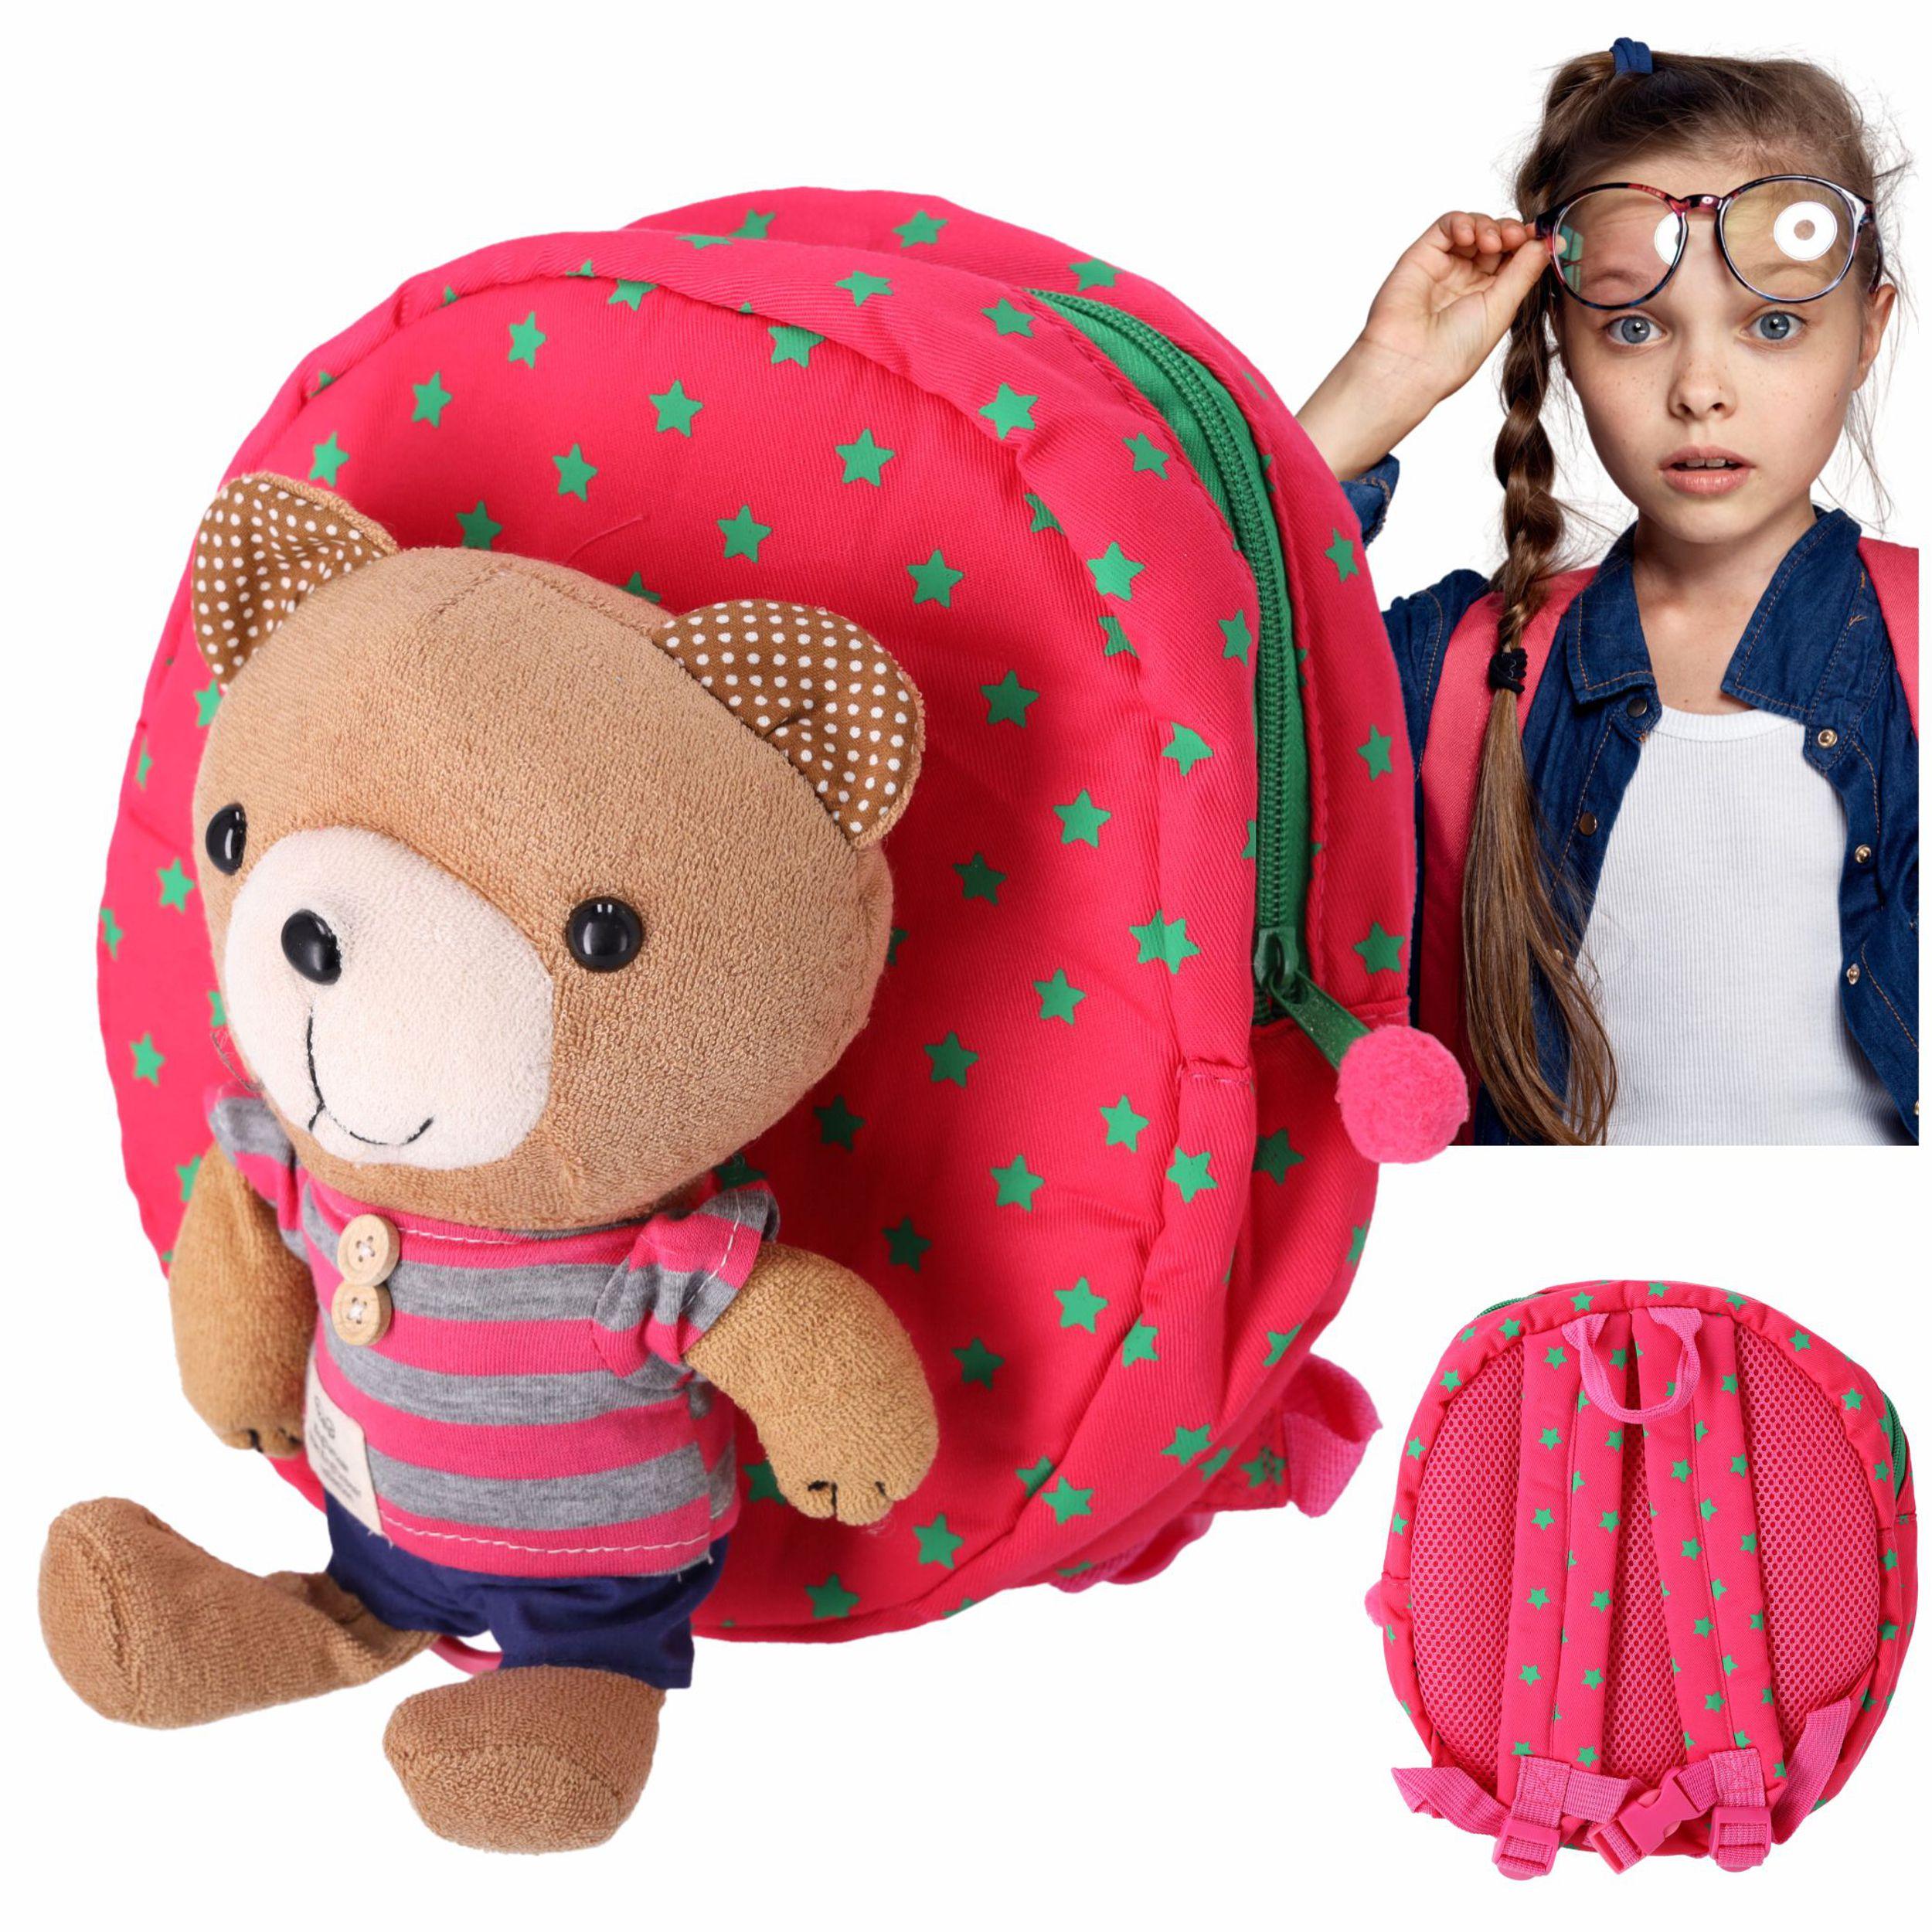 Backpack  for children with a safety leash - pink